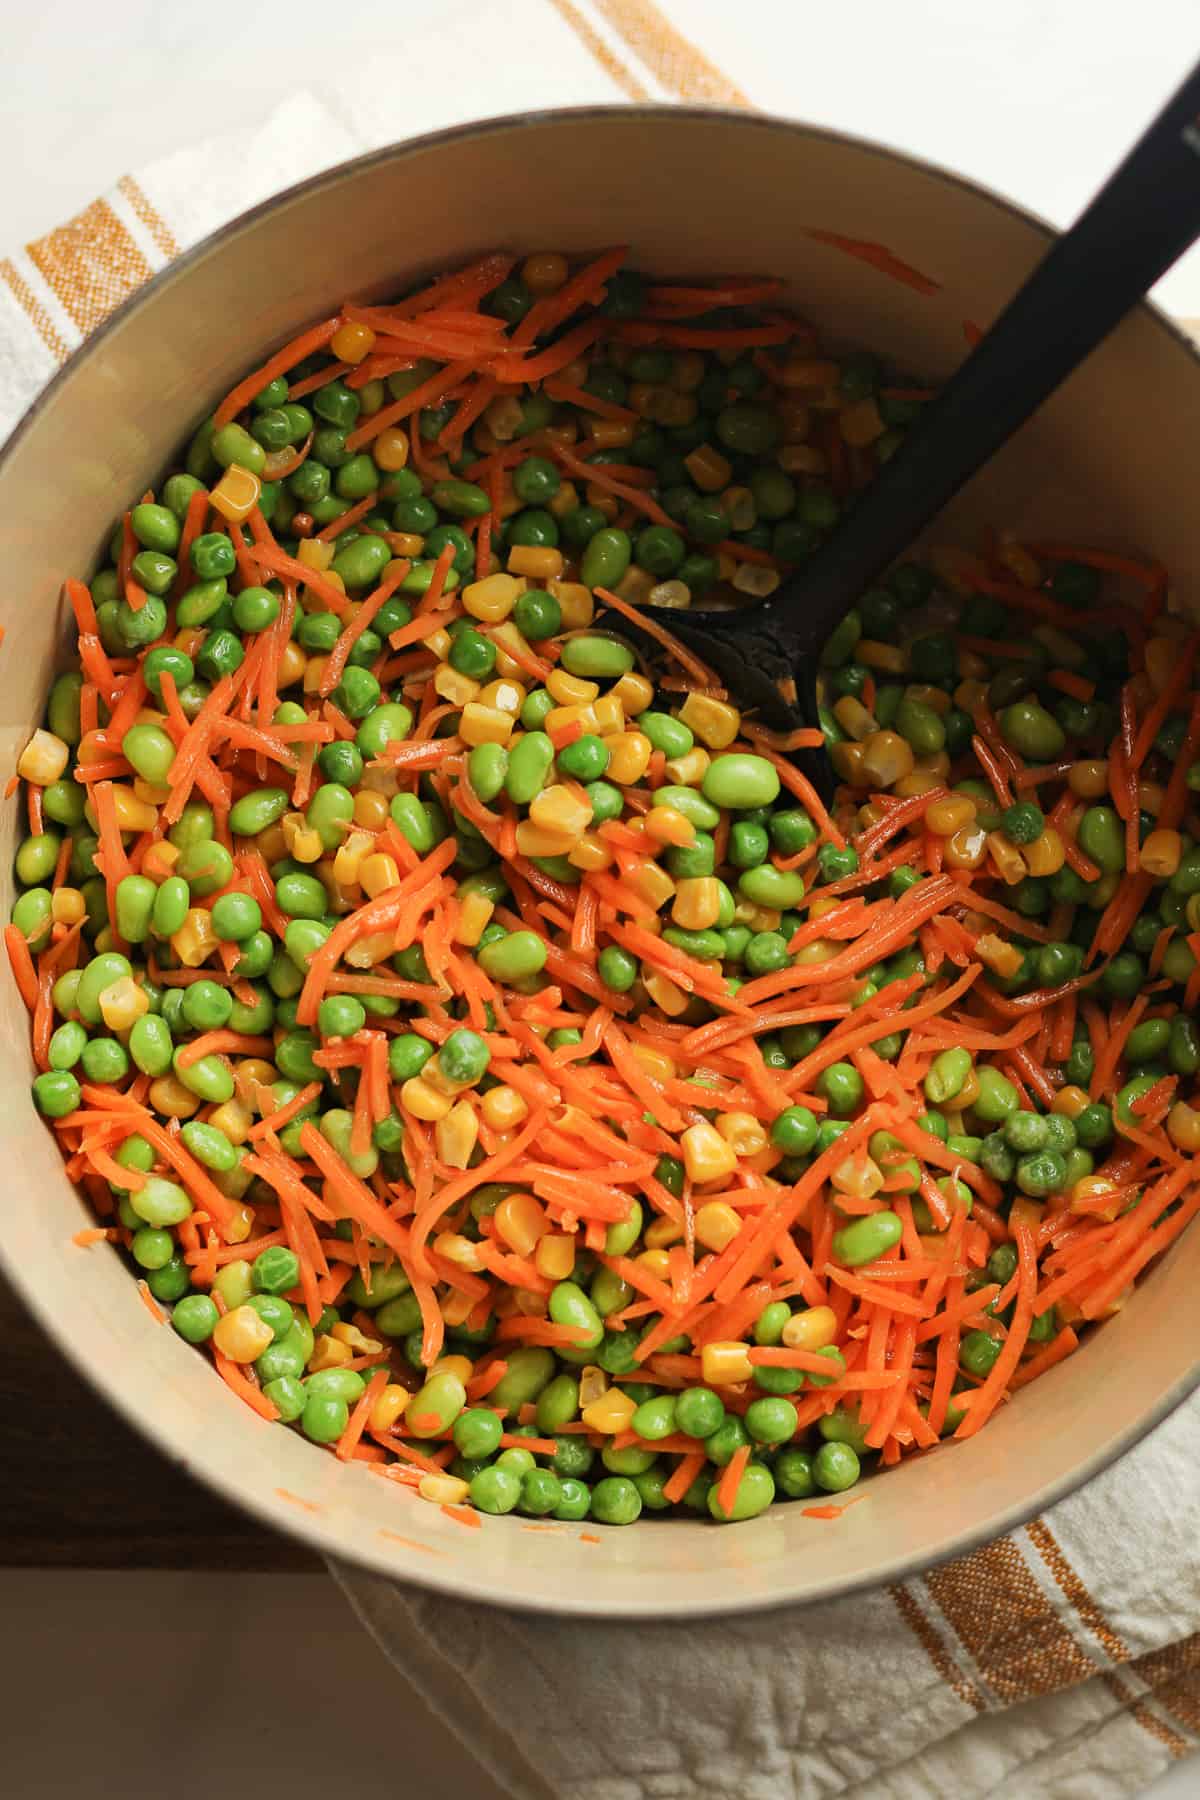 A stock pot of the frozen veggies and shredded carrots.